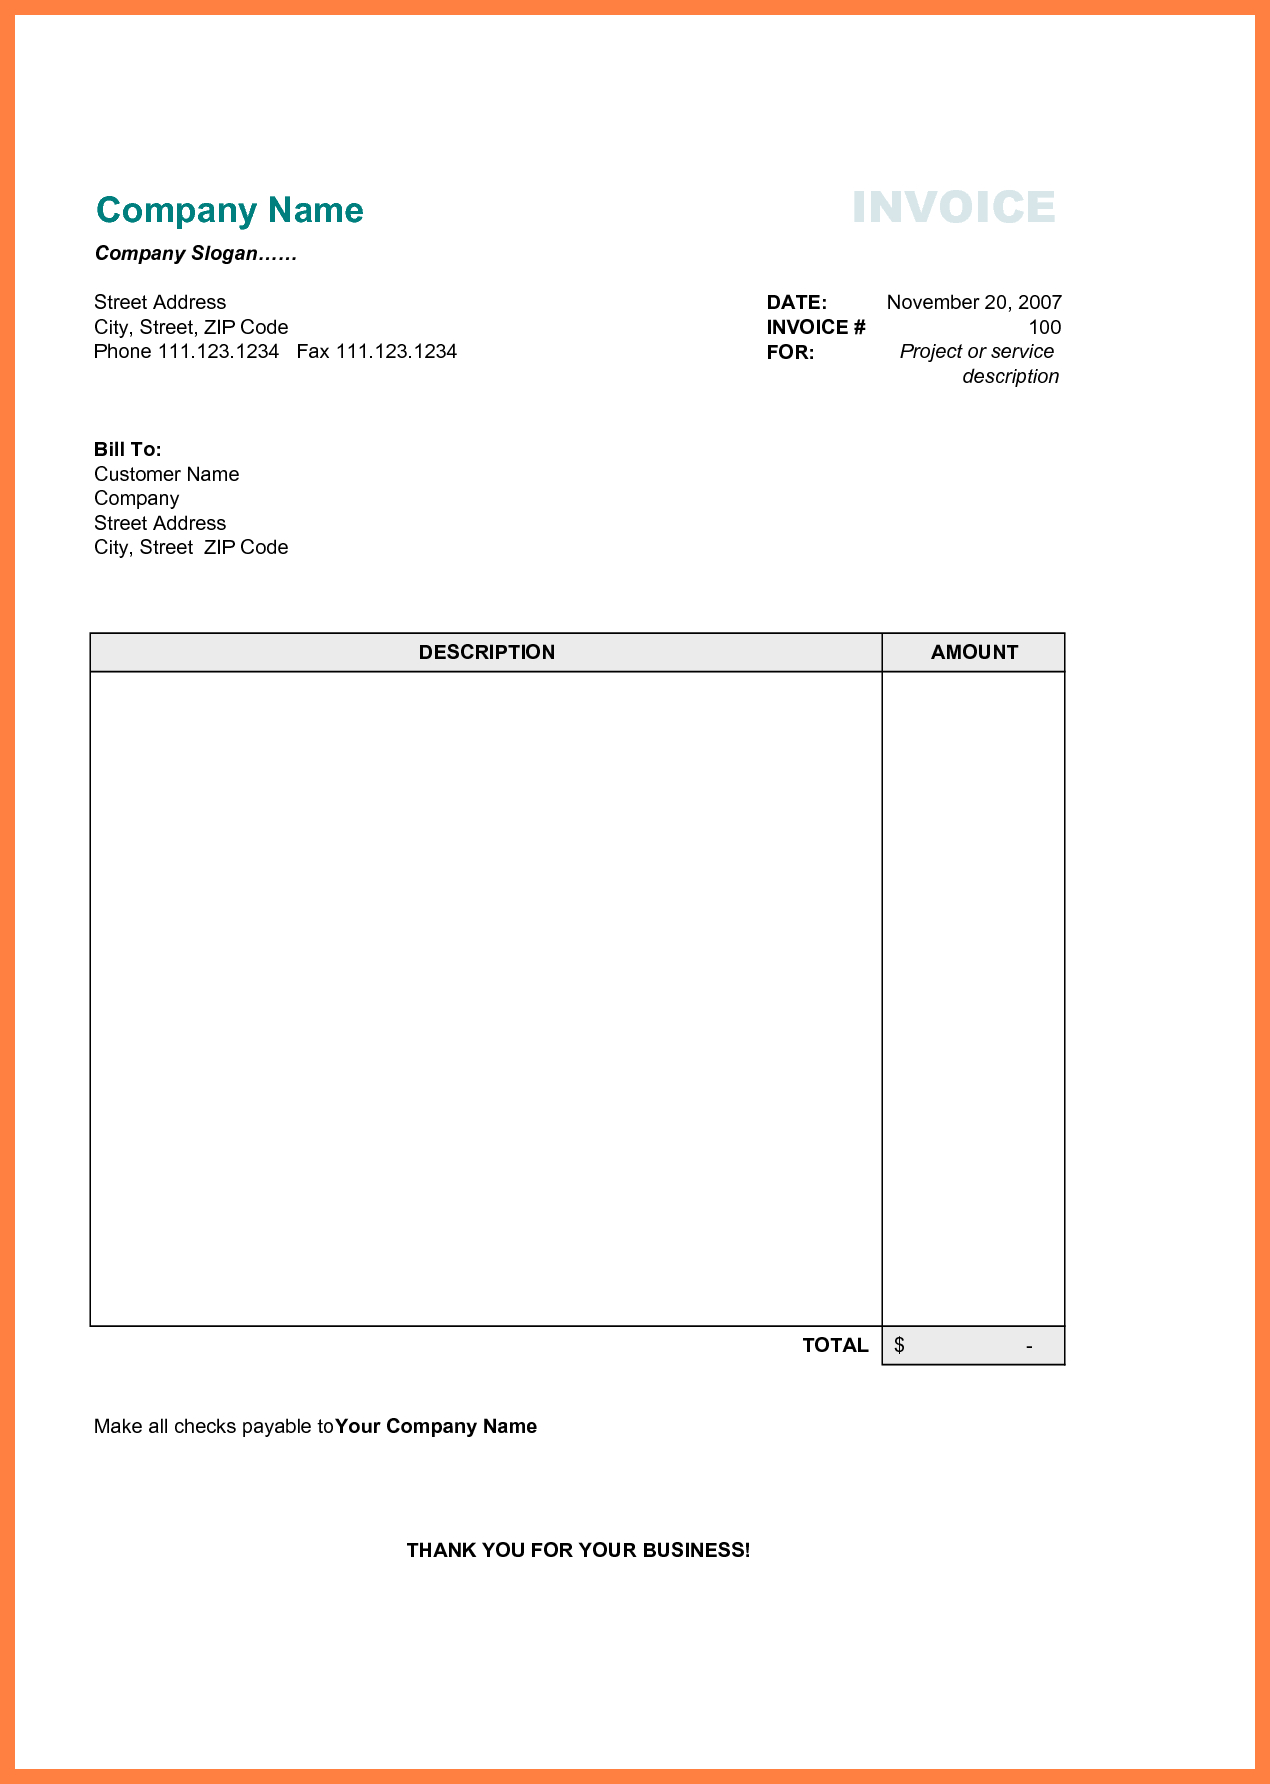 Free Printable Business Invoice Template - Invoice Format In Excel - Free Printable Invoice Forms